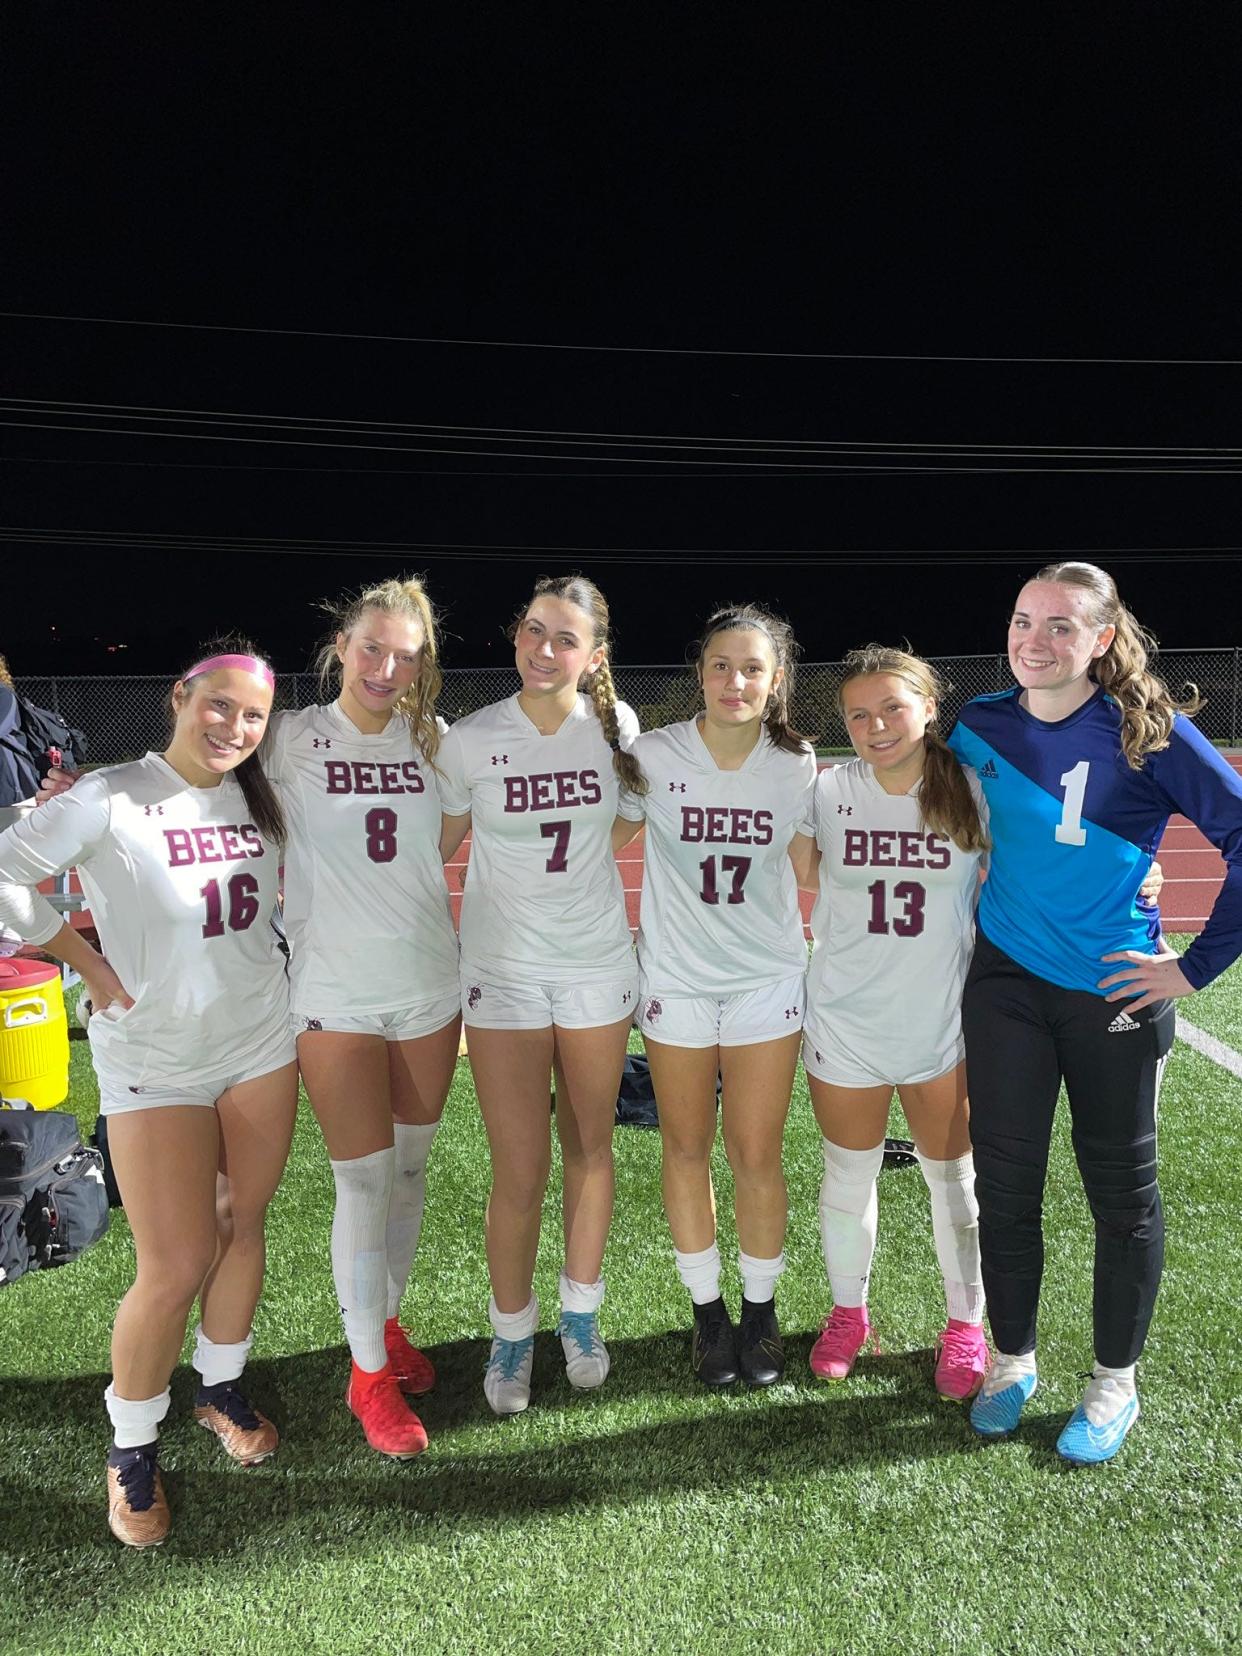 Byron-Bergen's Ava Gray, Mia Gray, Grace DiQuattro, Elizabeth Starowitz and goalkeeper Natalie Prinzi after upsetting previously unbeaten No. 1 Gananda 4-1 in the Section V Class C2 semifinals Tuesday, Oct. 25 at Pittsford Sutherland.